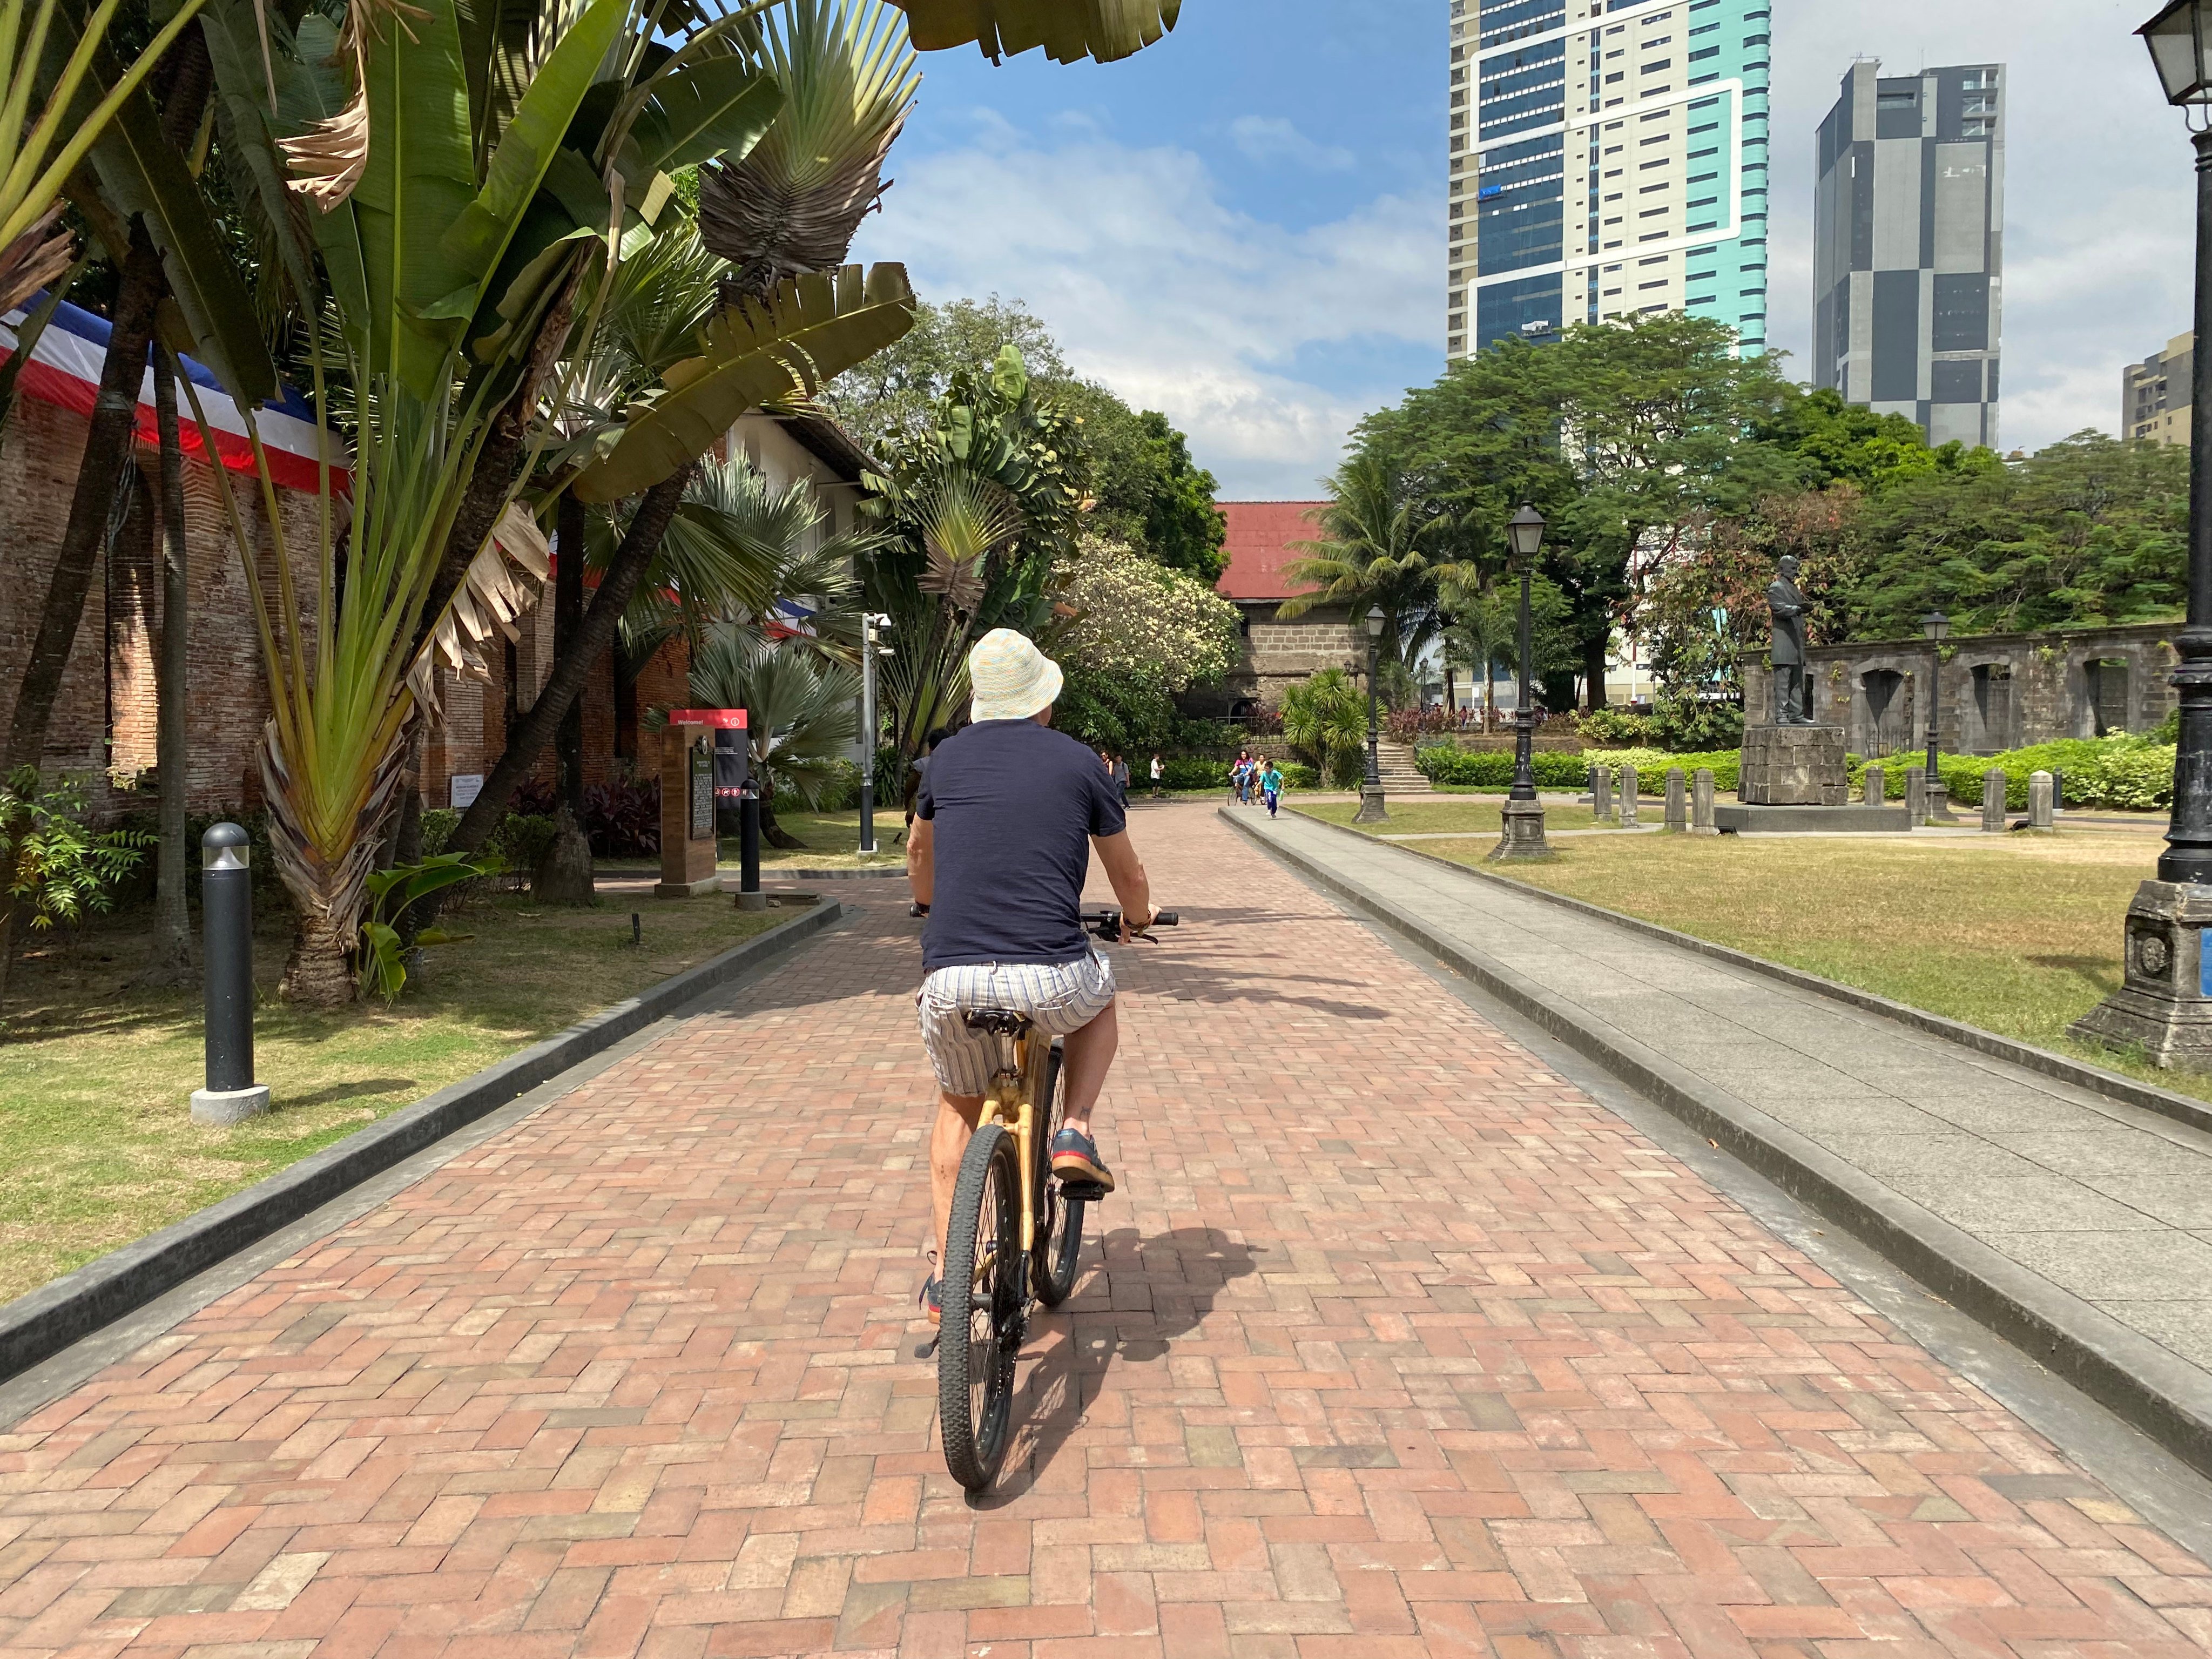 A guided cycling tour through Intramuros, the oldest part of Manila in the Philippines, takes in courtyards, gardens and a site closely connected to the darkest period in the former Spanish city’s recent history. Photo: Tamara Hinson